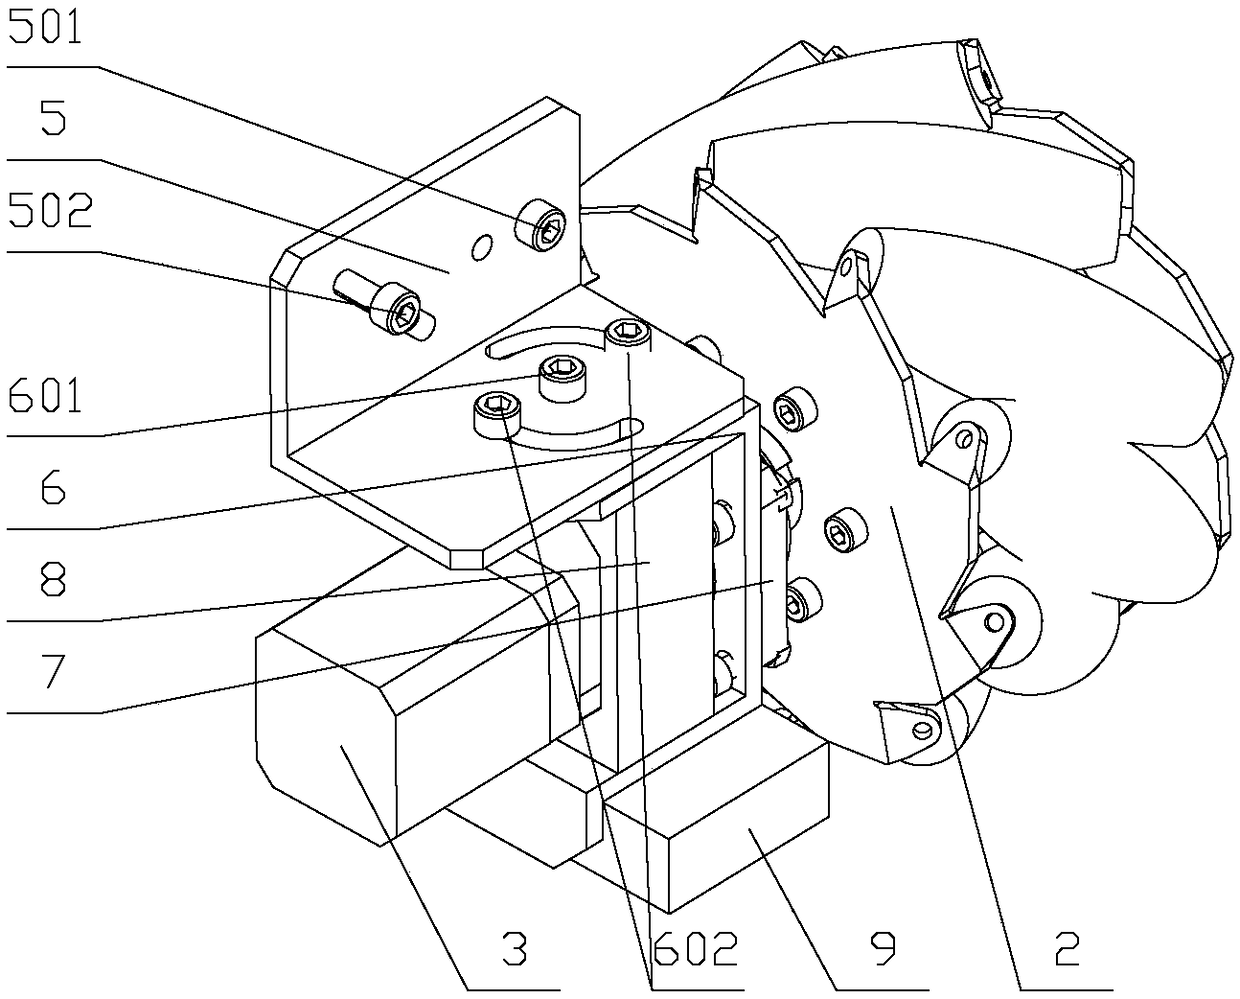 A Three-Axis Adjustable Suspension Mechanism for Robots